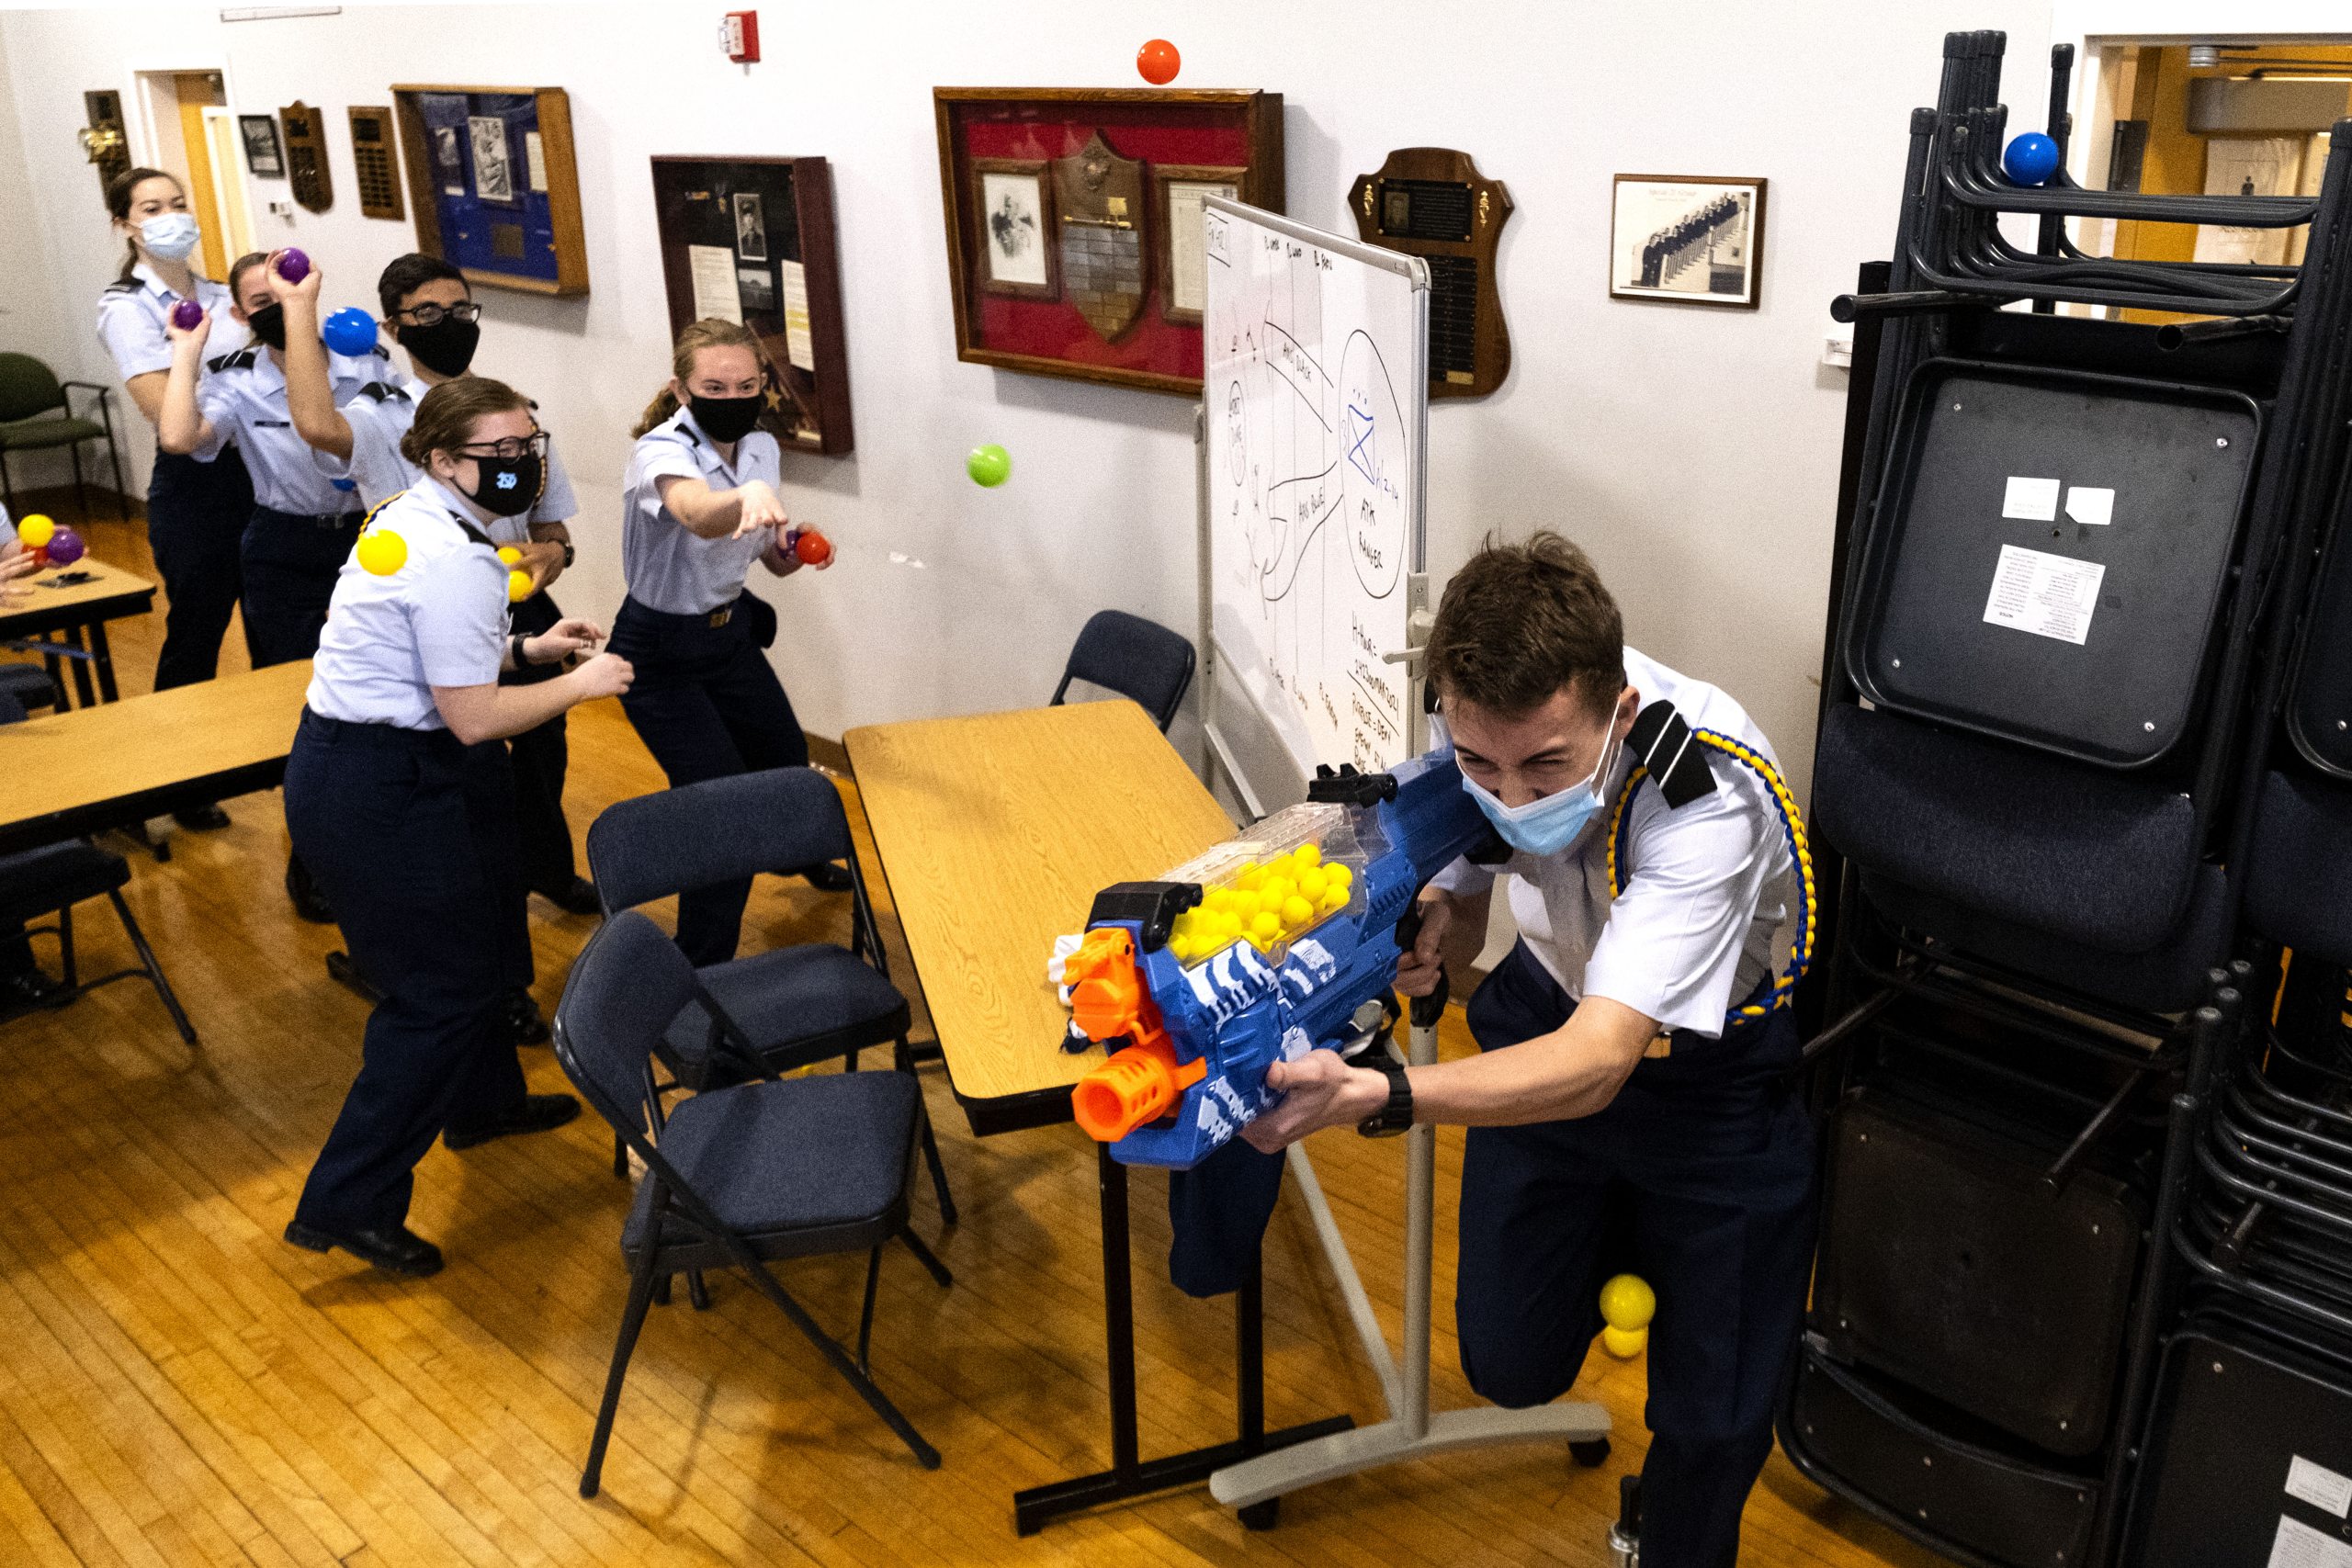 Five students throw balls at Nerf-gun-toting student as he ruuns away. All wear Covid masks.